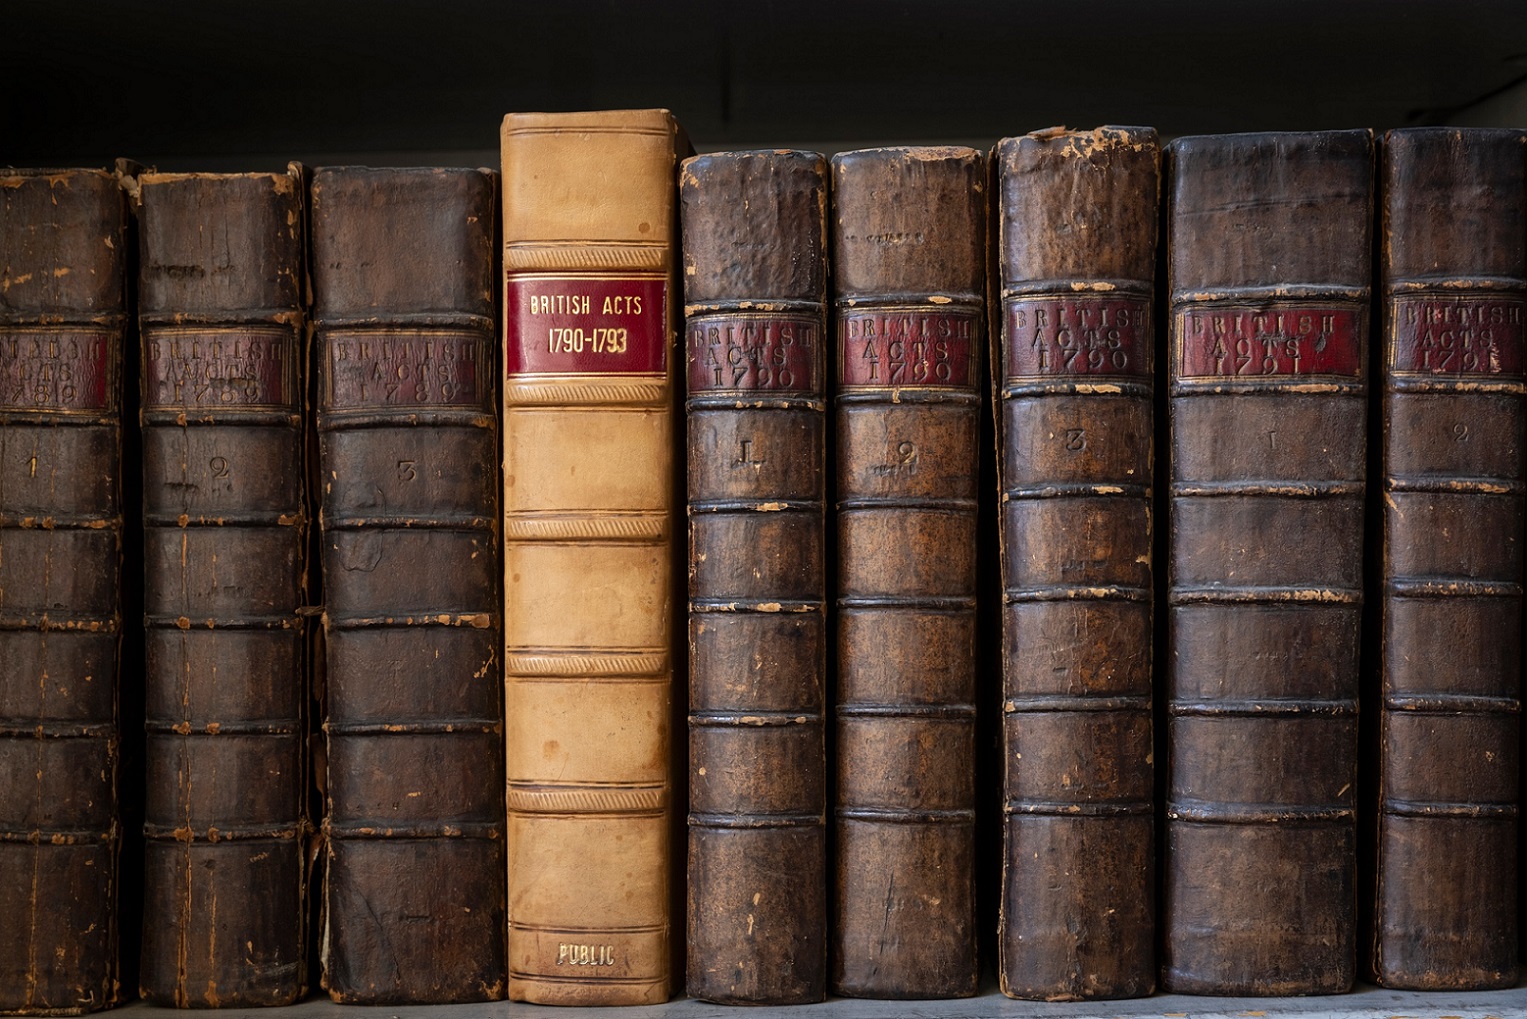 A series of old books at the Signet Library in Edinburgh